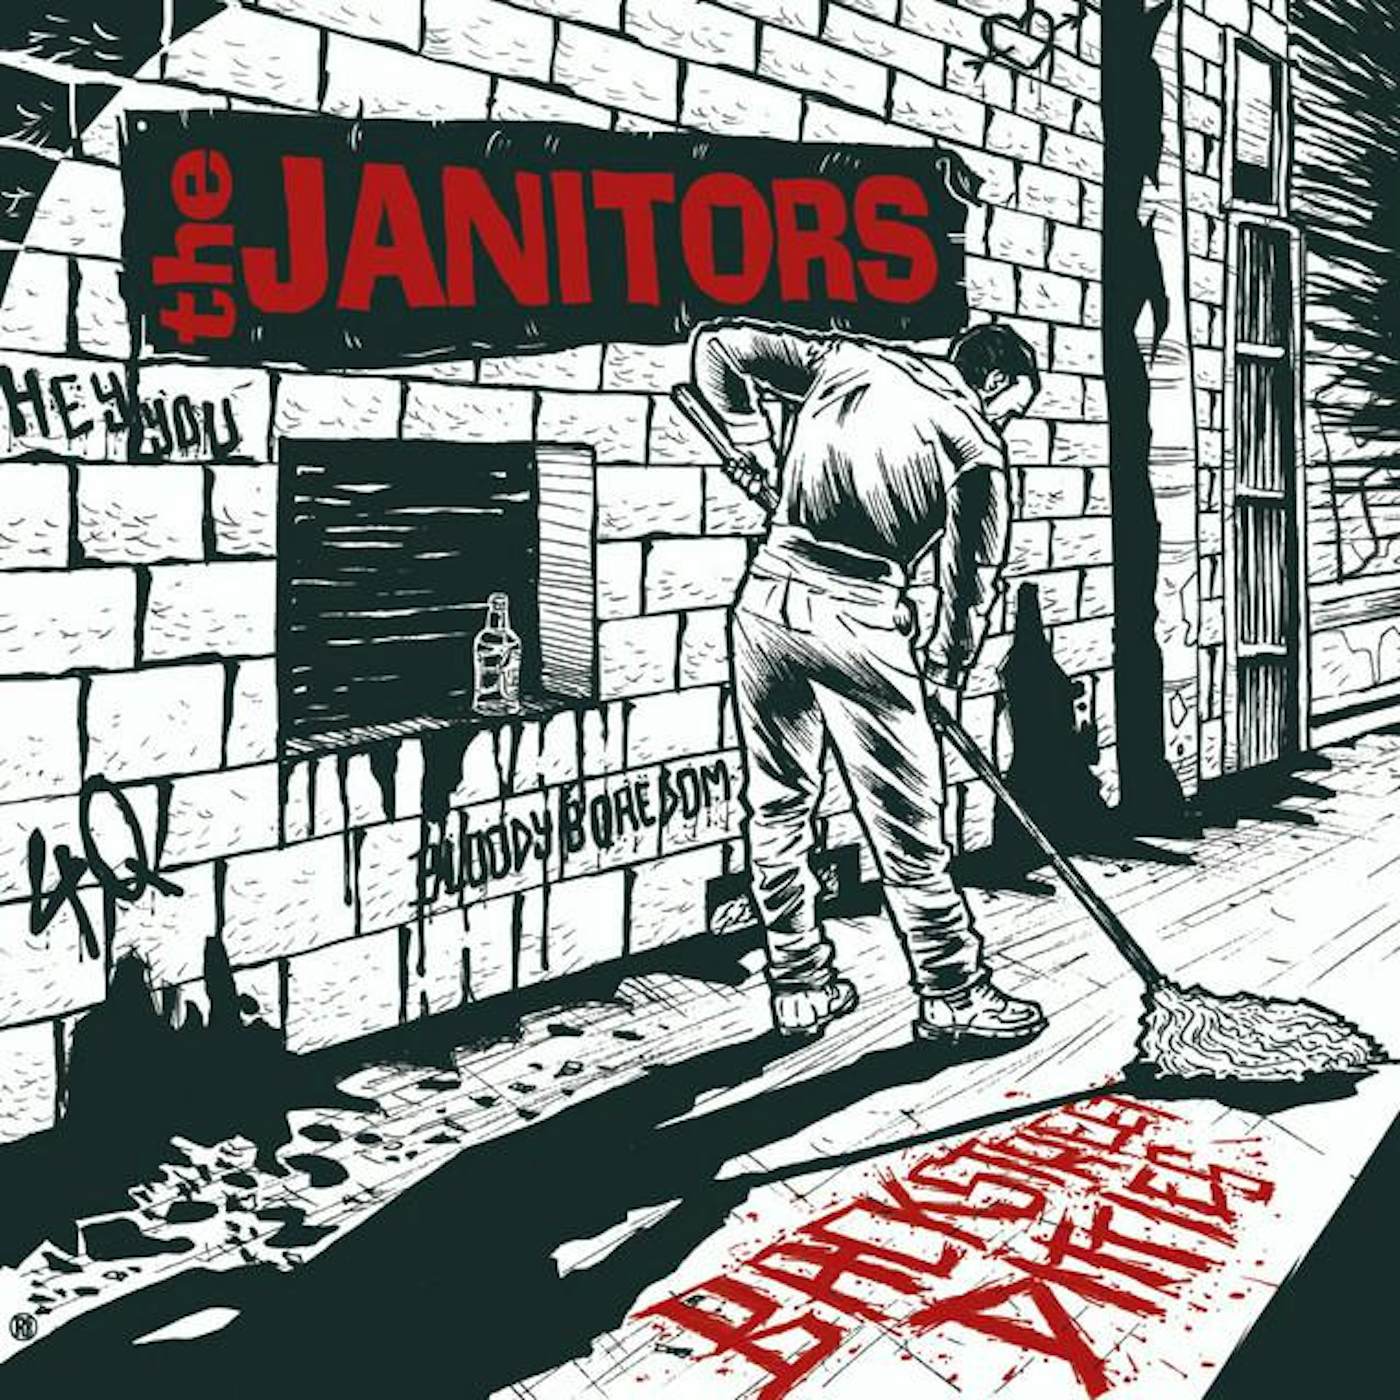 The Janitors